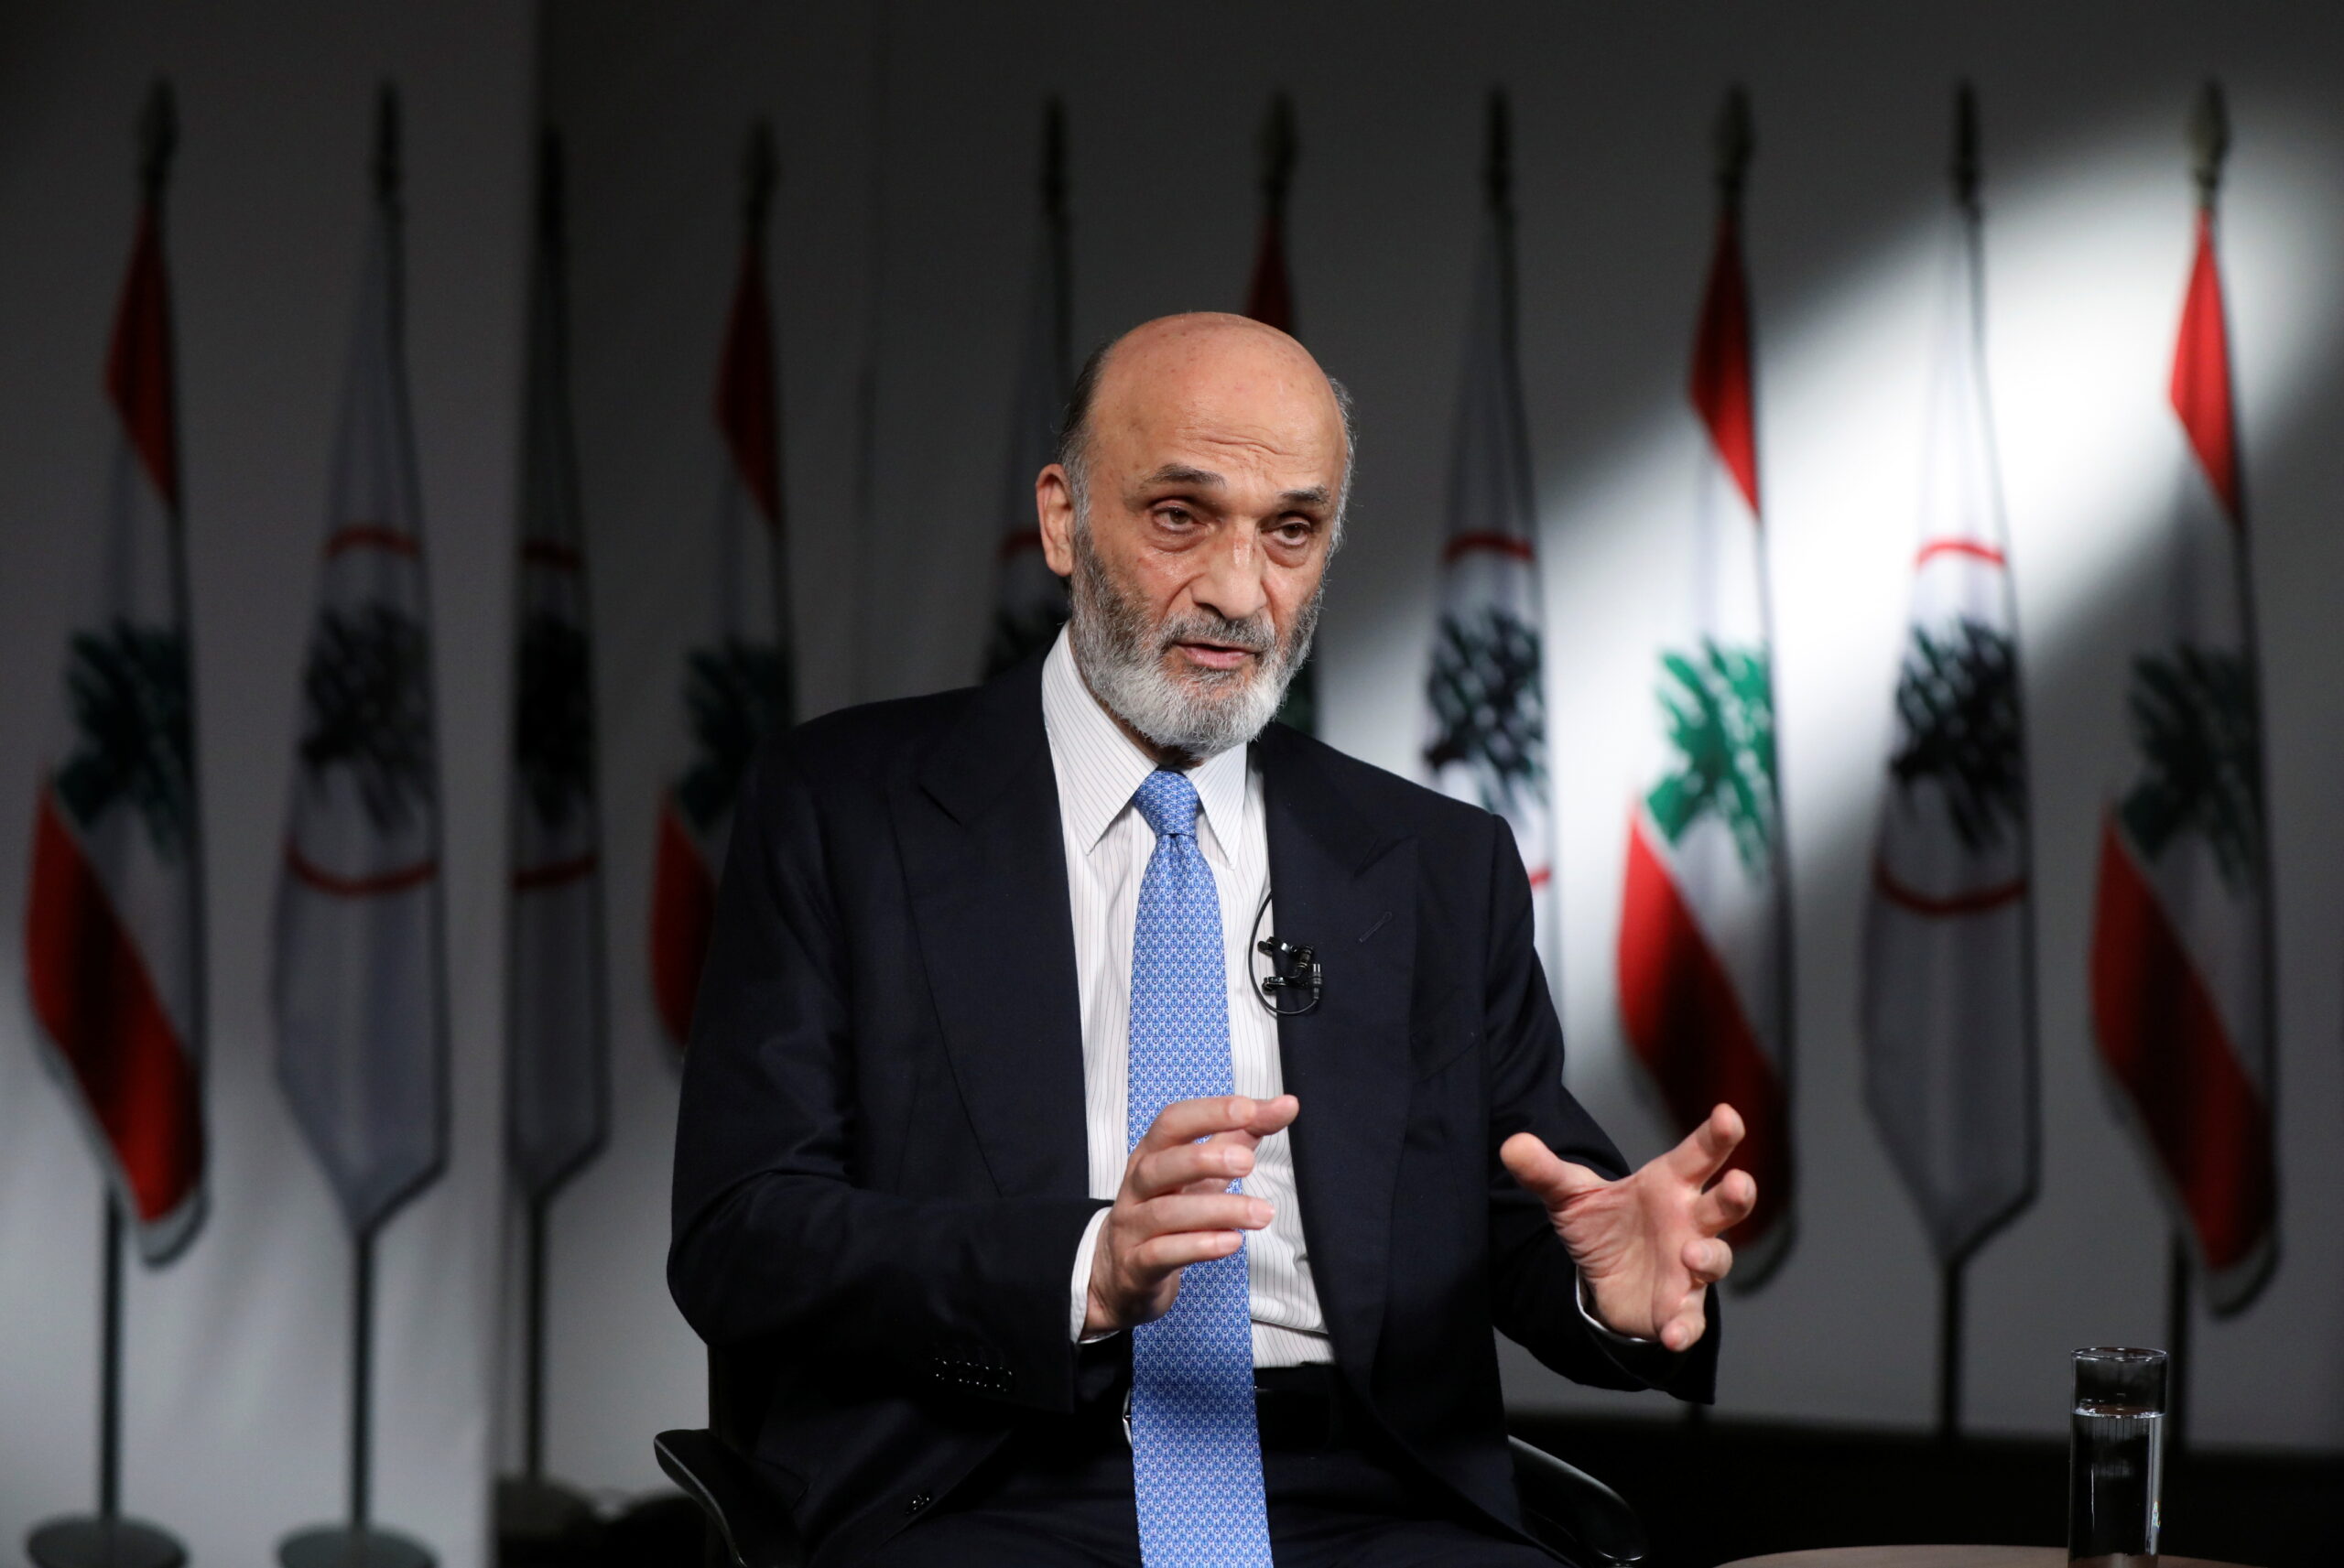 Samir Geagea, the leader of Lebanon’s Christian Lebanese Forces party, speaks during an interview with Reuters at his residence in Maarab